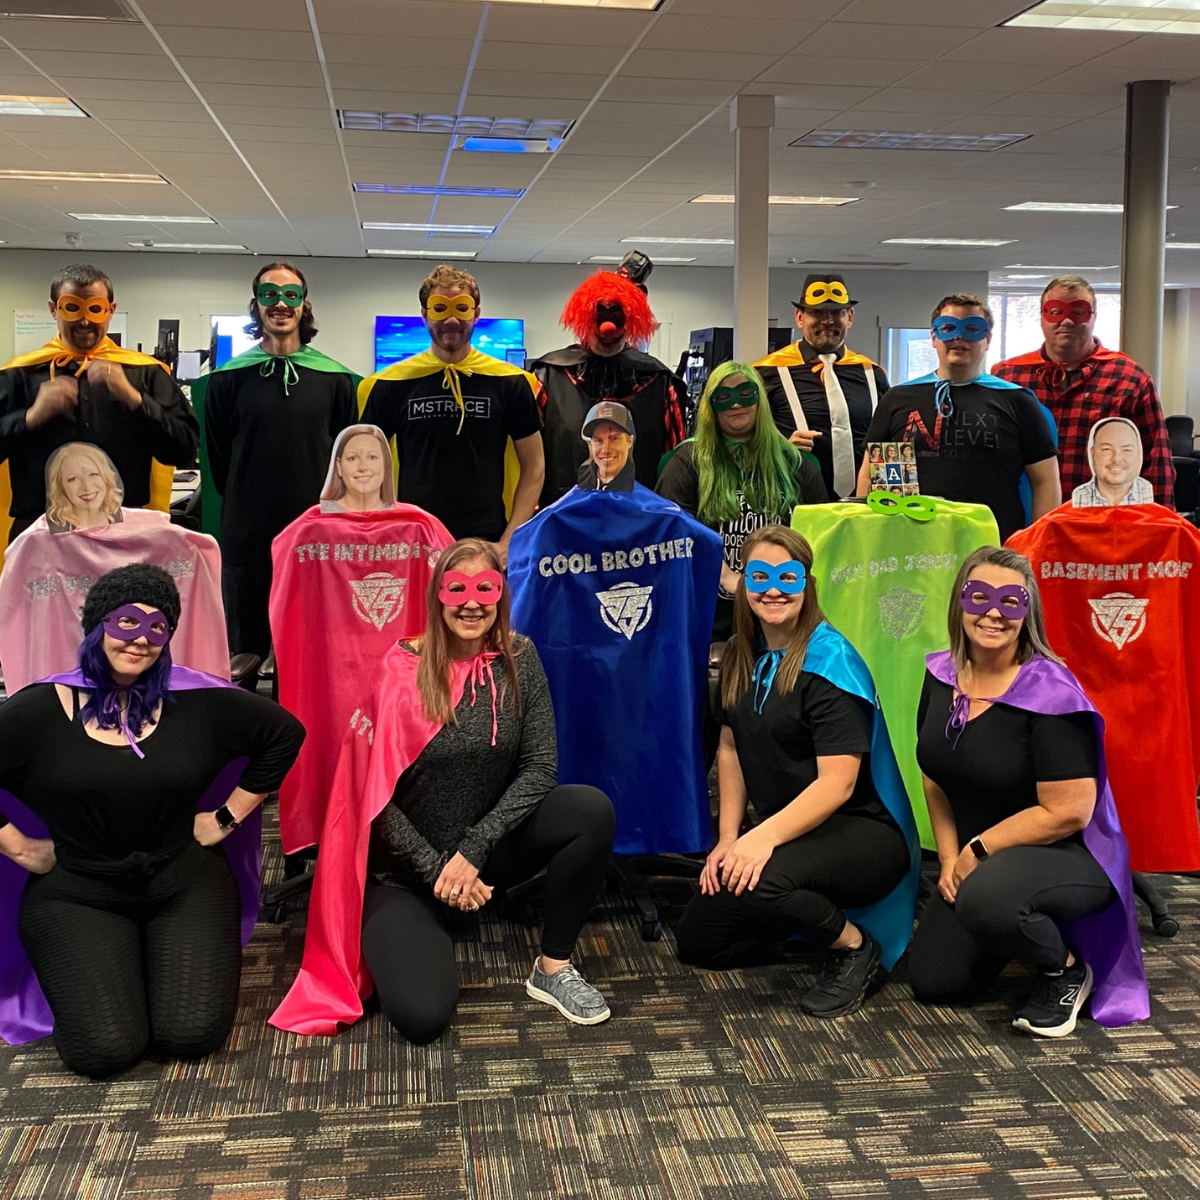 Employees dressed up as superheroes for an event.